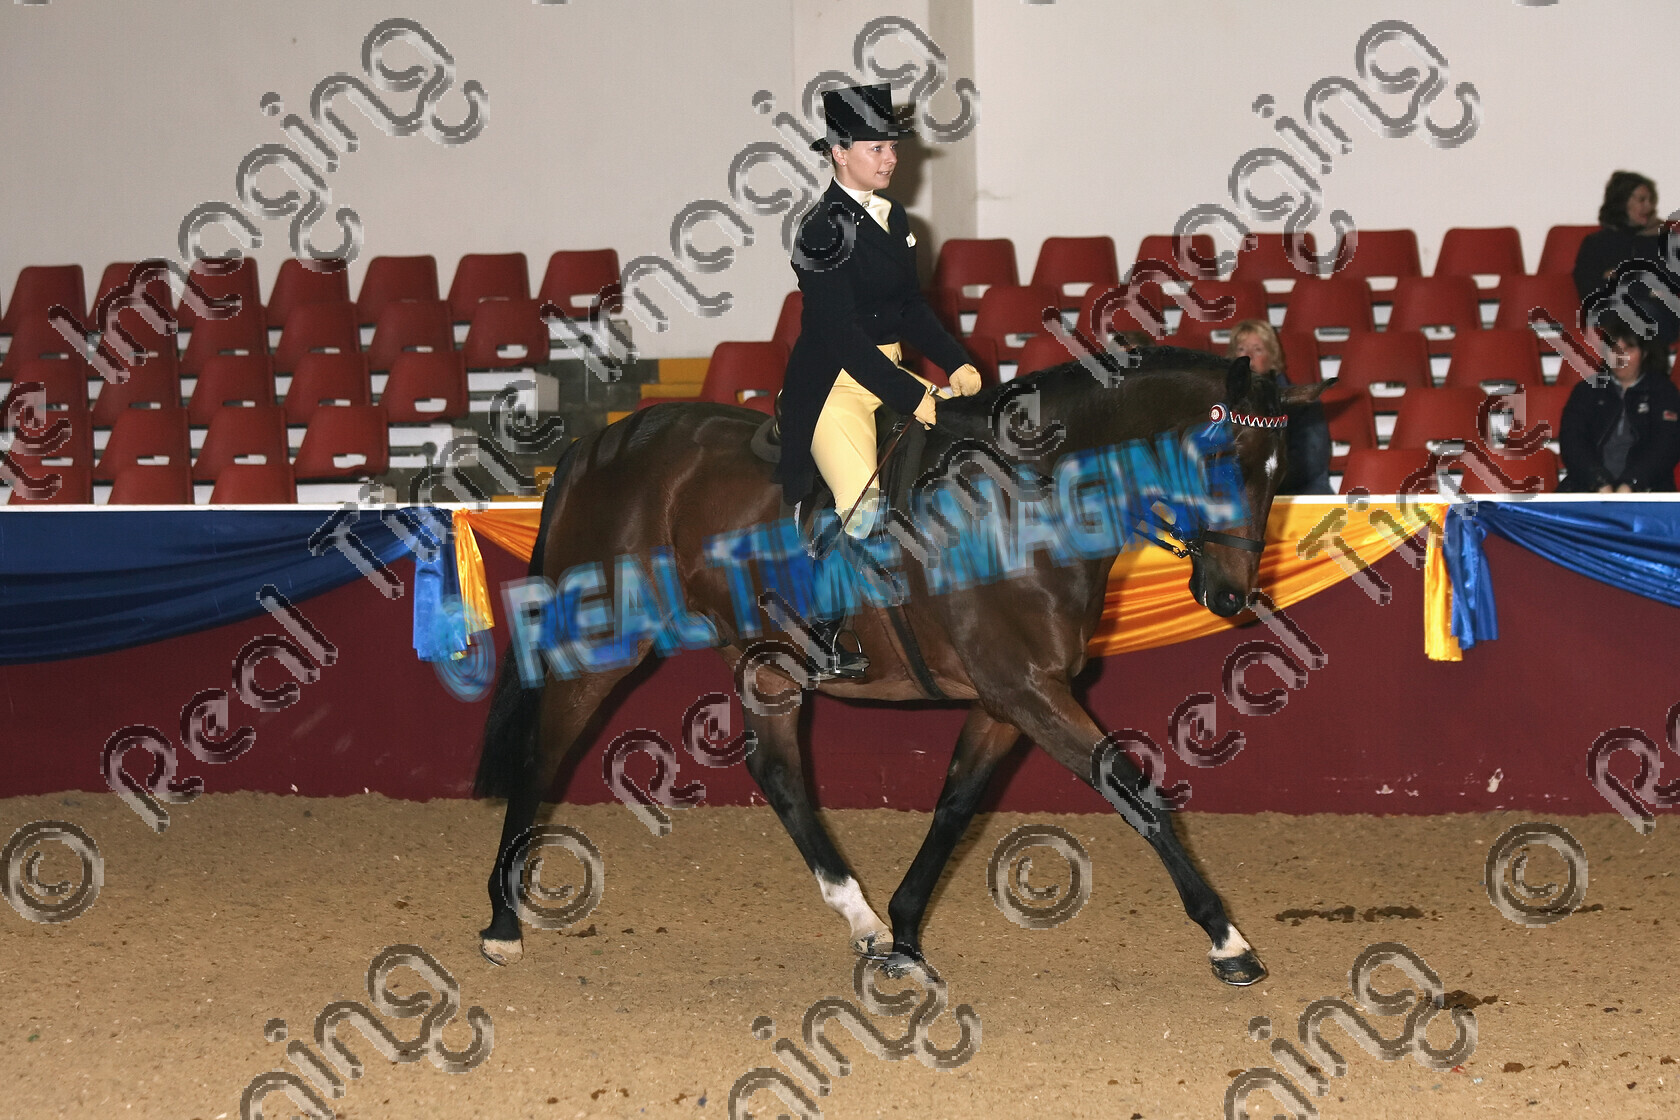 S07-08-19-031 
 Keywords: Emily Curtis trot 212 DOUBLE CHANCE Bay Gelding Amateur Rider Riding Horse Open Ponies (UK) Winter Championships Unex Towerlands Brow band horse pony showing Indoors winner won Rosette